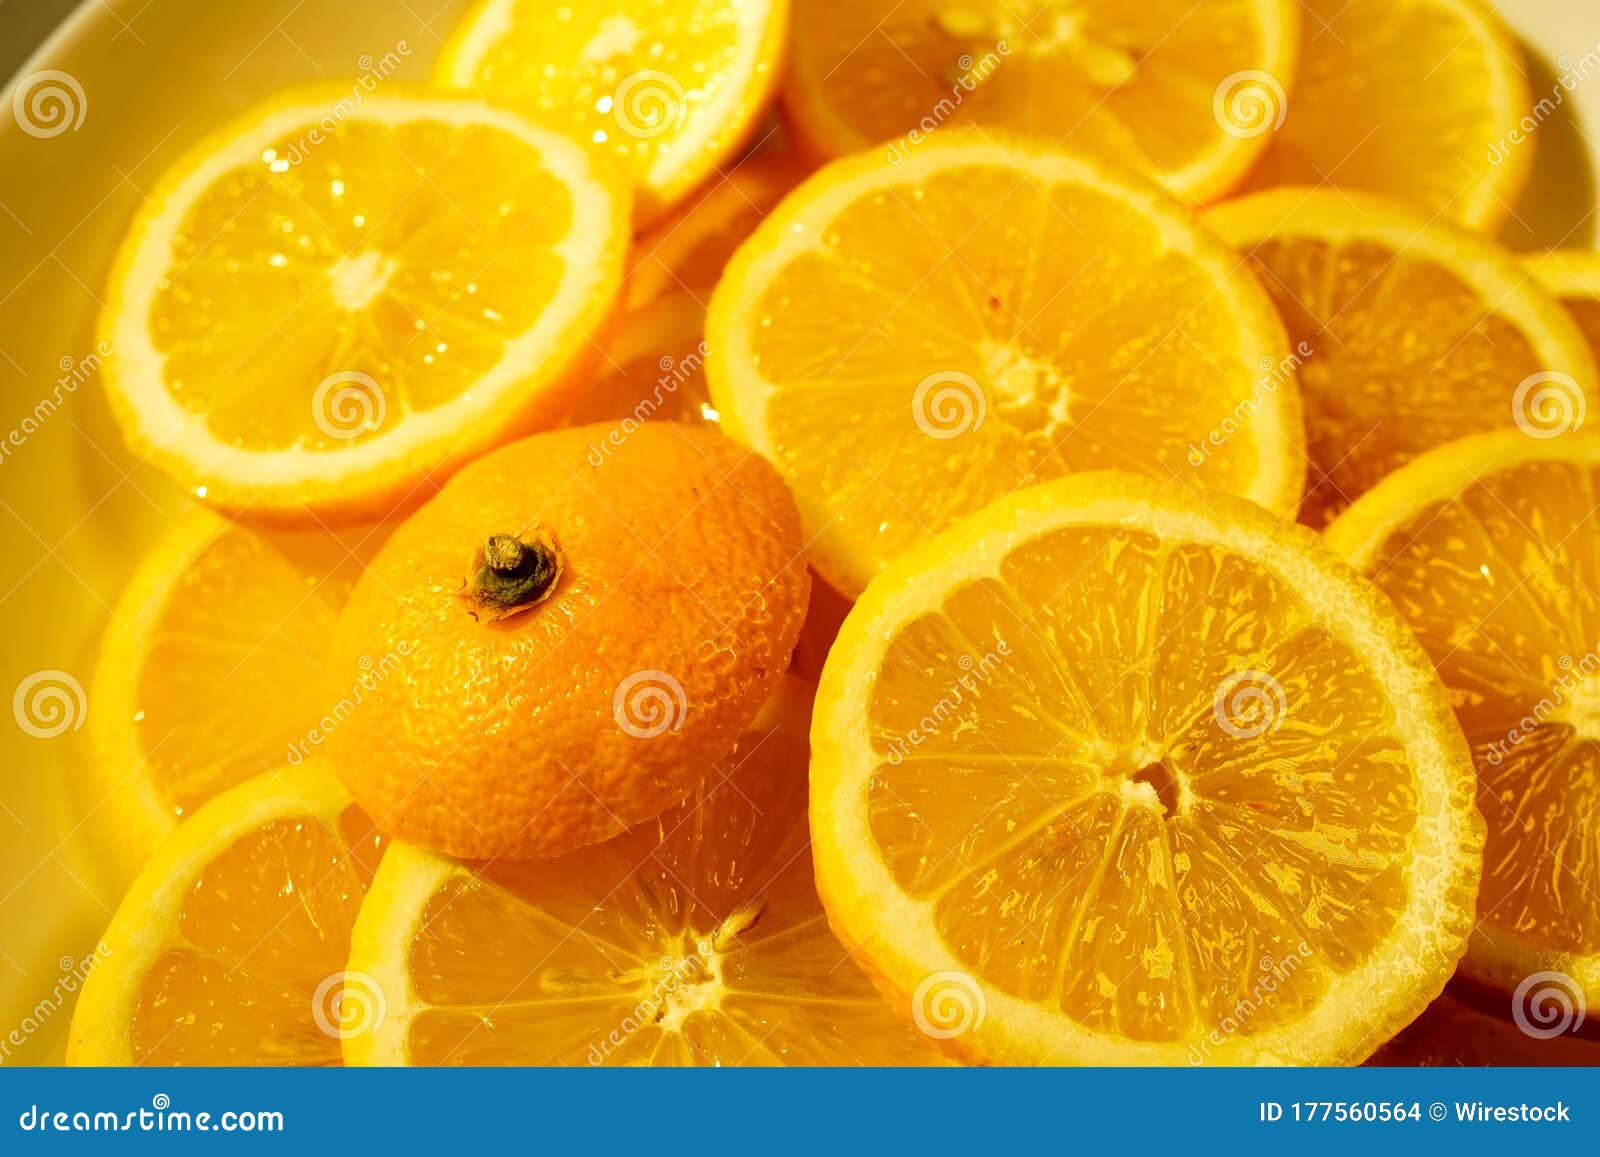 yellow lemons on a plate on a sunny day